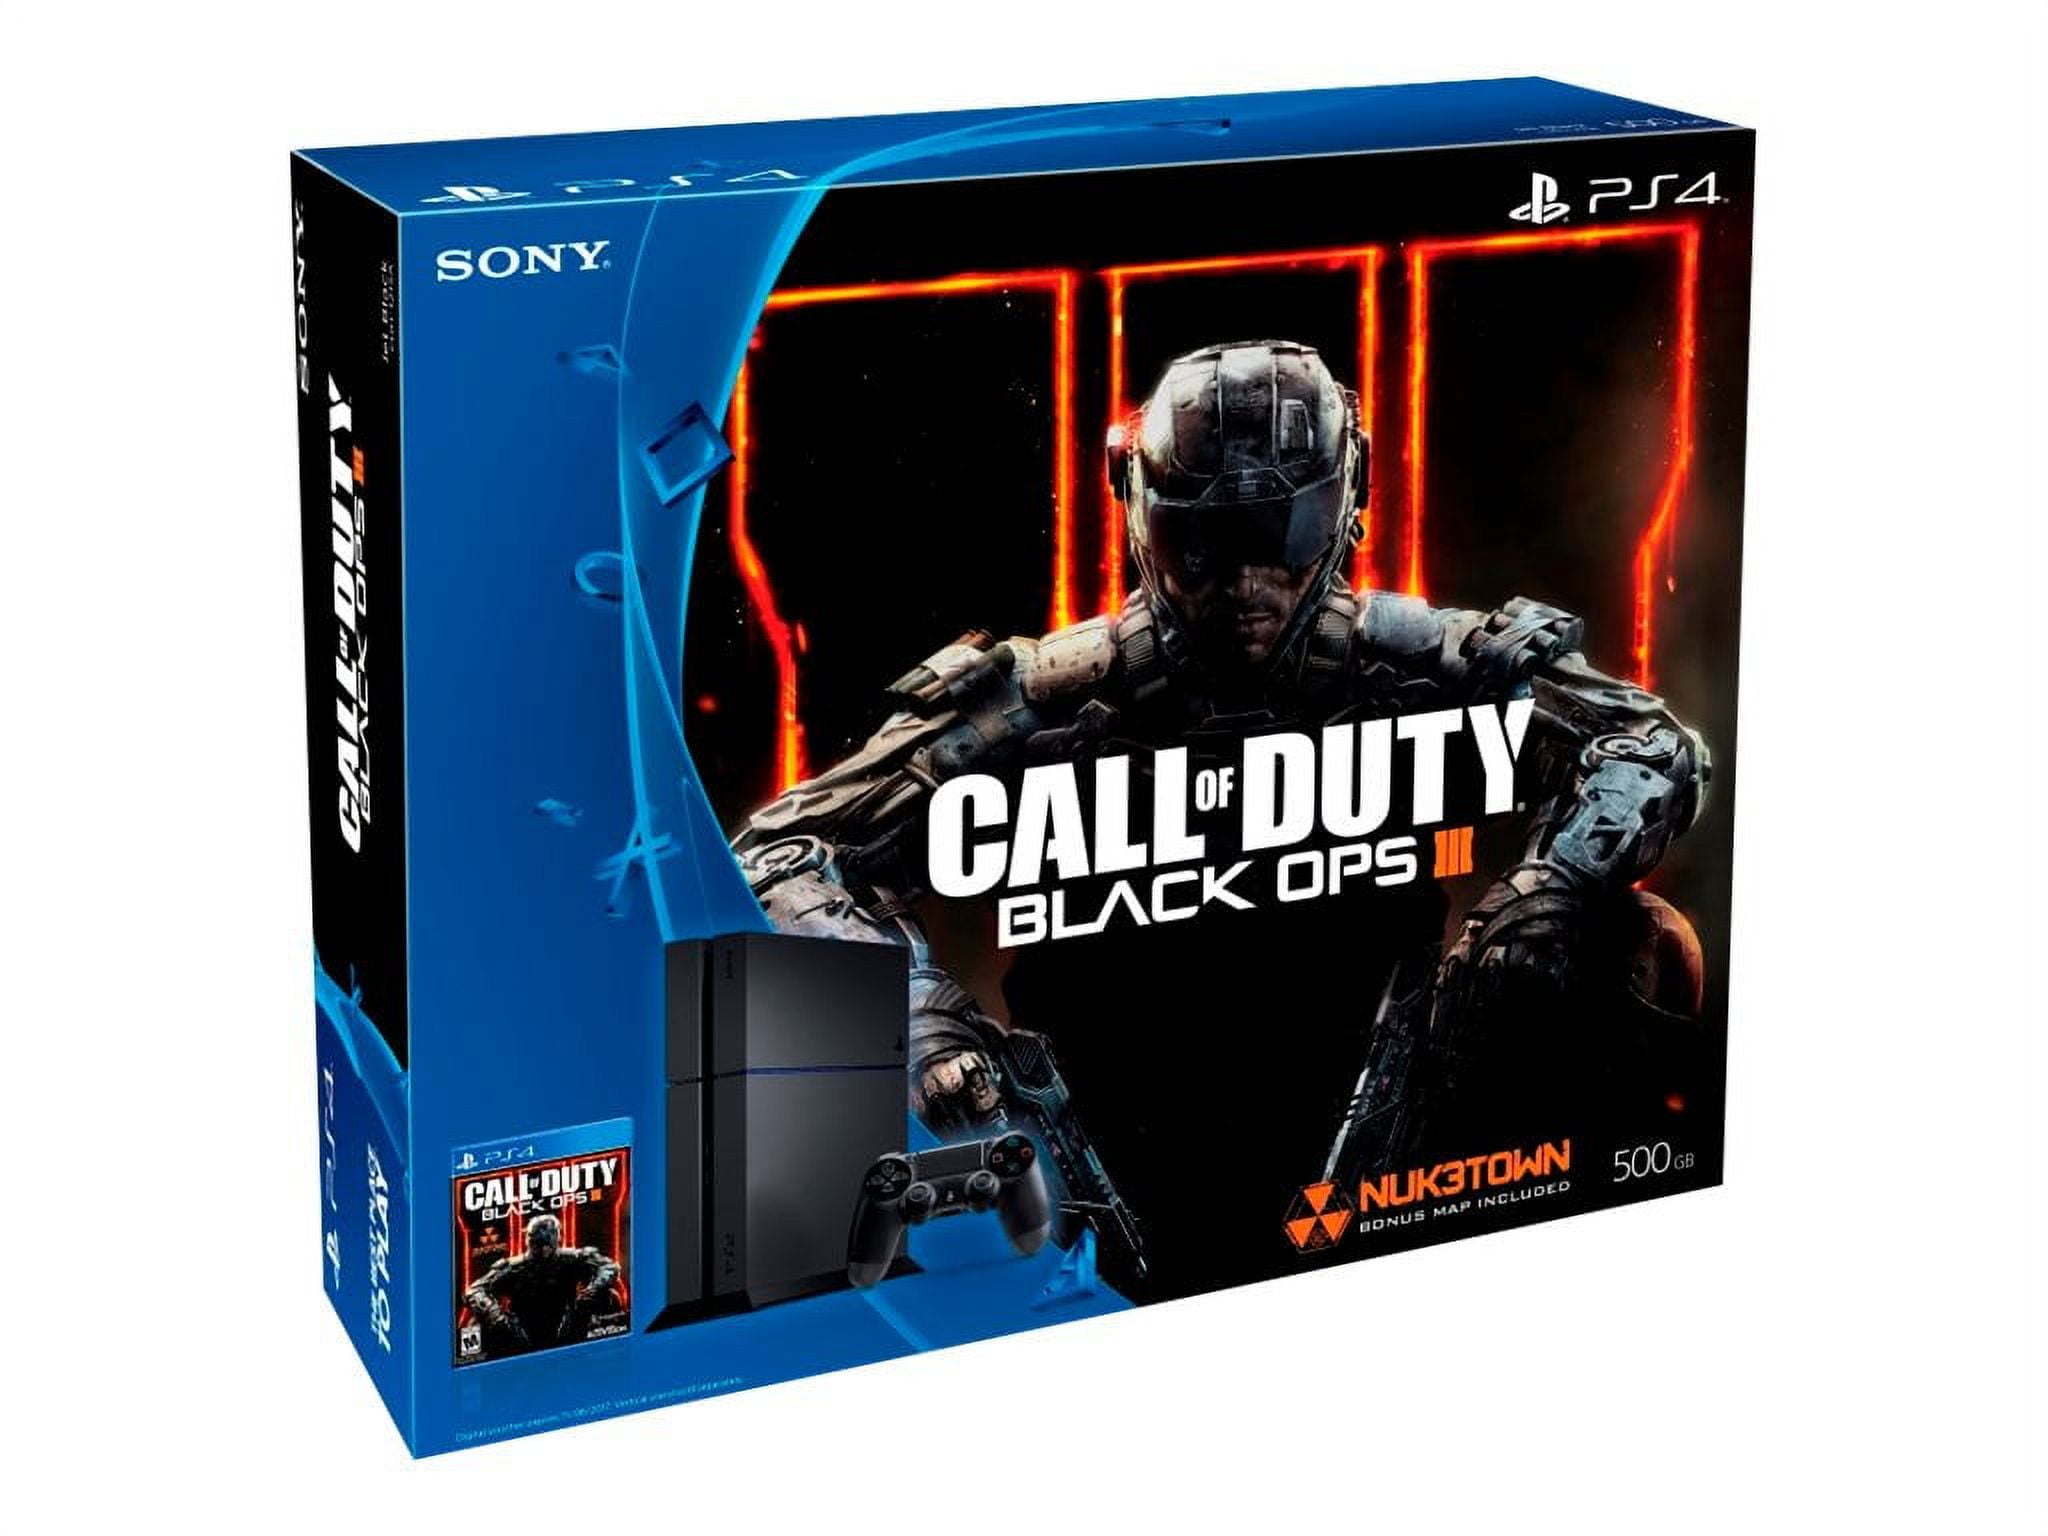 PlayStation 4 500GB Console Bundle with Call of Duty Black Ops III 